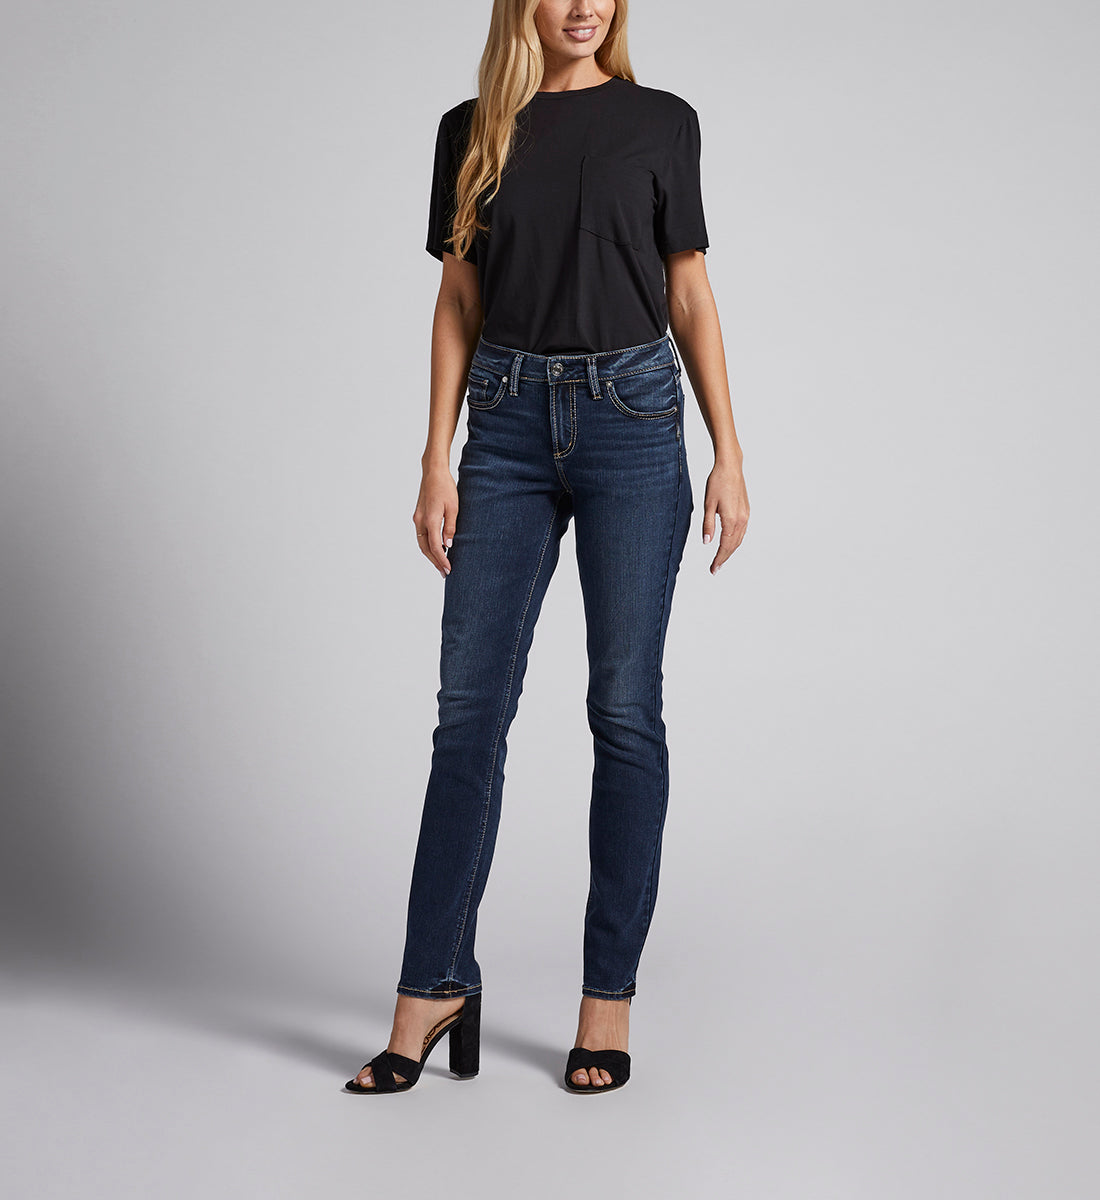 Silver Jeans Elyse Mid Rise Straight Leg Jeans